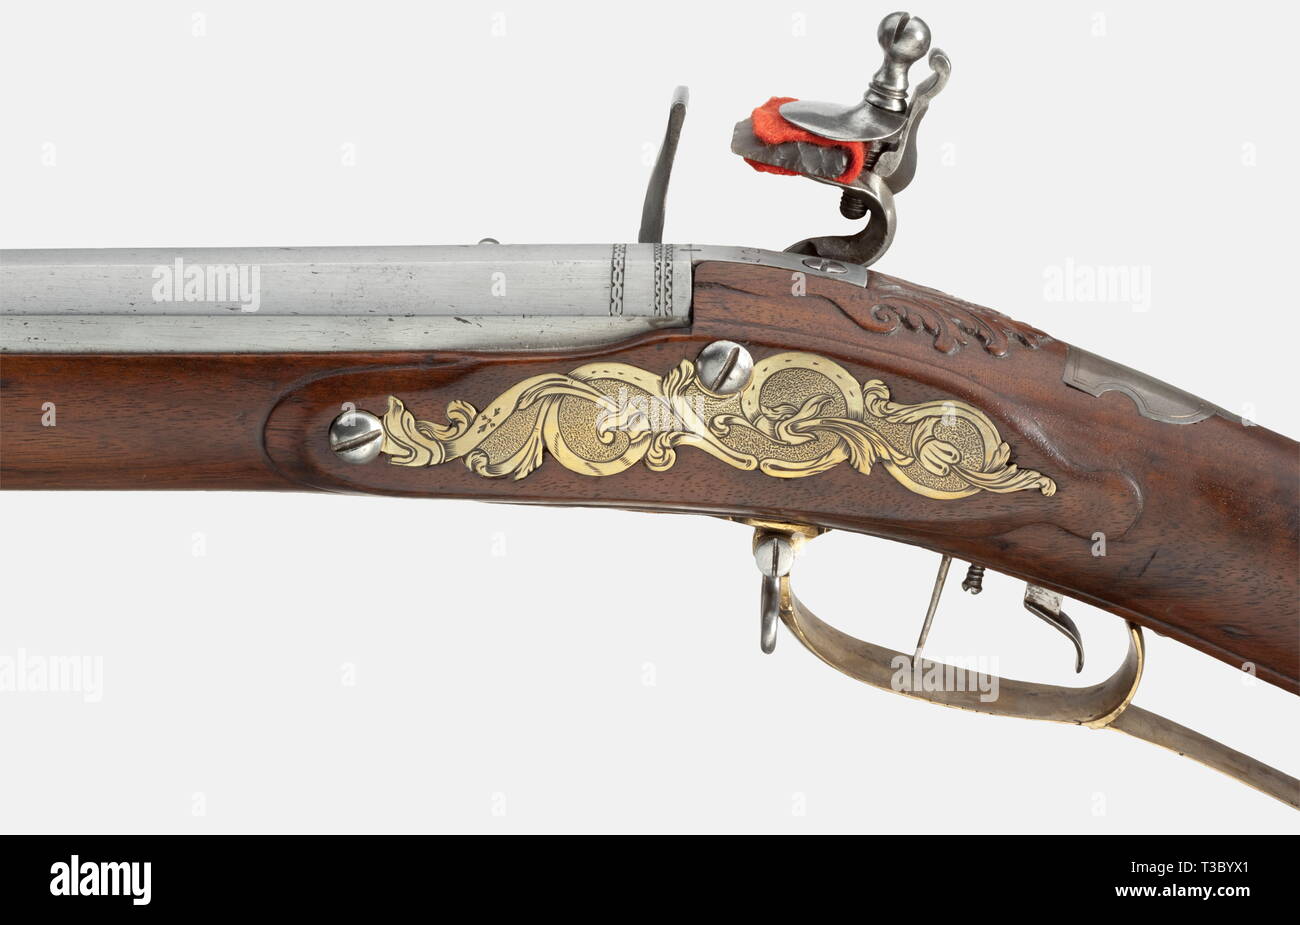 A flintlock rifle, German, 1730/40. Octagonal rifled barrel in 14 mm calibre. Brass front sight and folding rear sight. The chamber and muzzle are modestly engraved. The tang is inscribed '12'. Flintlock engraved with hunting themes. Adjustable set trigger. Walnut full stock with brass furniture decorated with scrollwork. Silver escutcheon. Patchbox. Wooden ramrod with horn tip. Length 109 cm. Provenance: Christie's, Bedeutende Europäische Waffen, Dusseldorf 1972, lot 101. historic, historical, 18th century, civil long guns, gun, weapons, arms, w, Additional-Rights-Clearance-Info-Not-Available Stock Photo